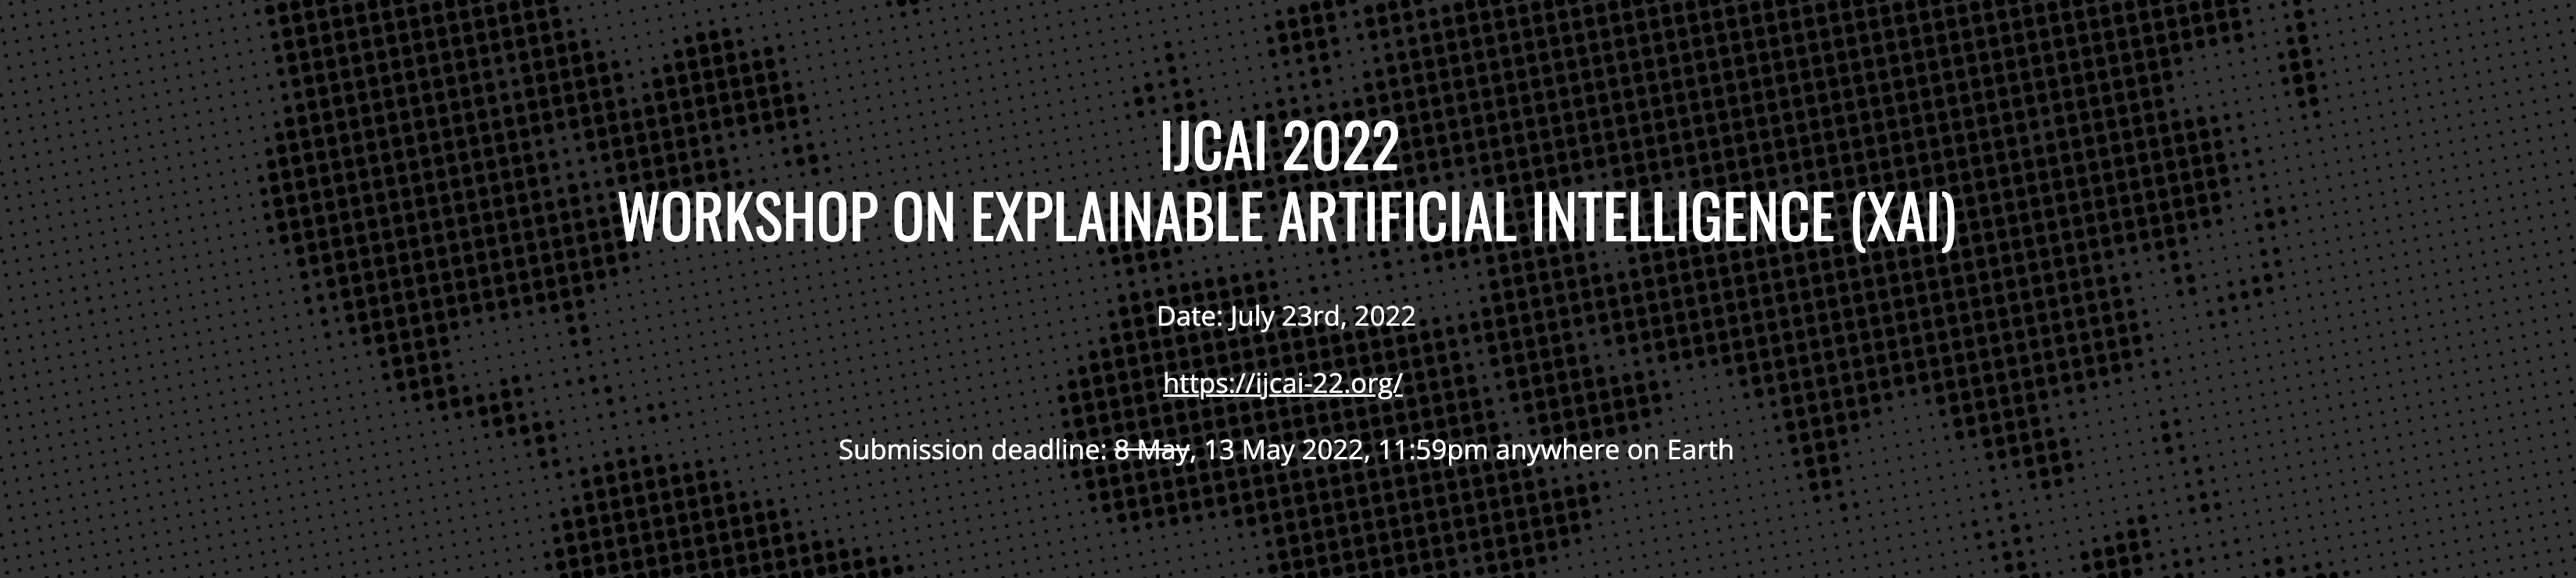 Papers Accepted at IJCAI 2022 Workshop on Explainable Artificial Intelligence (XAI)